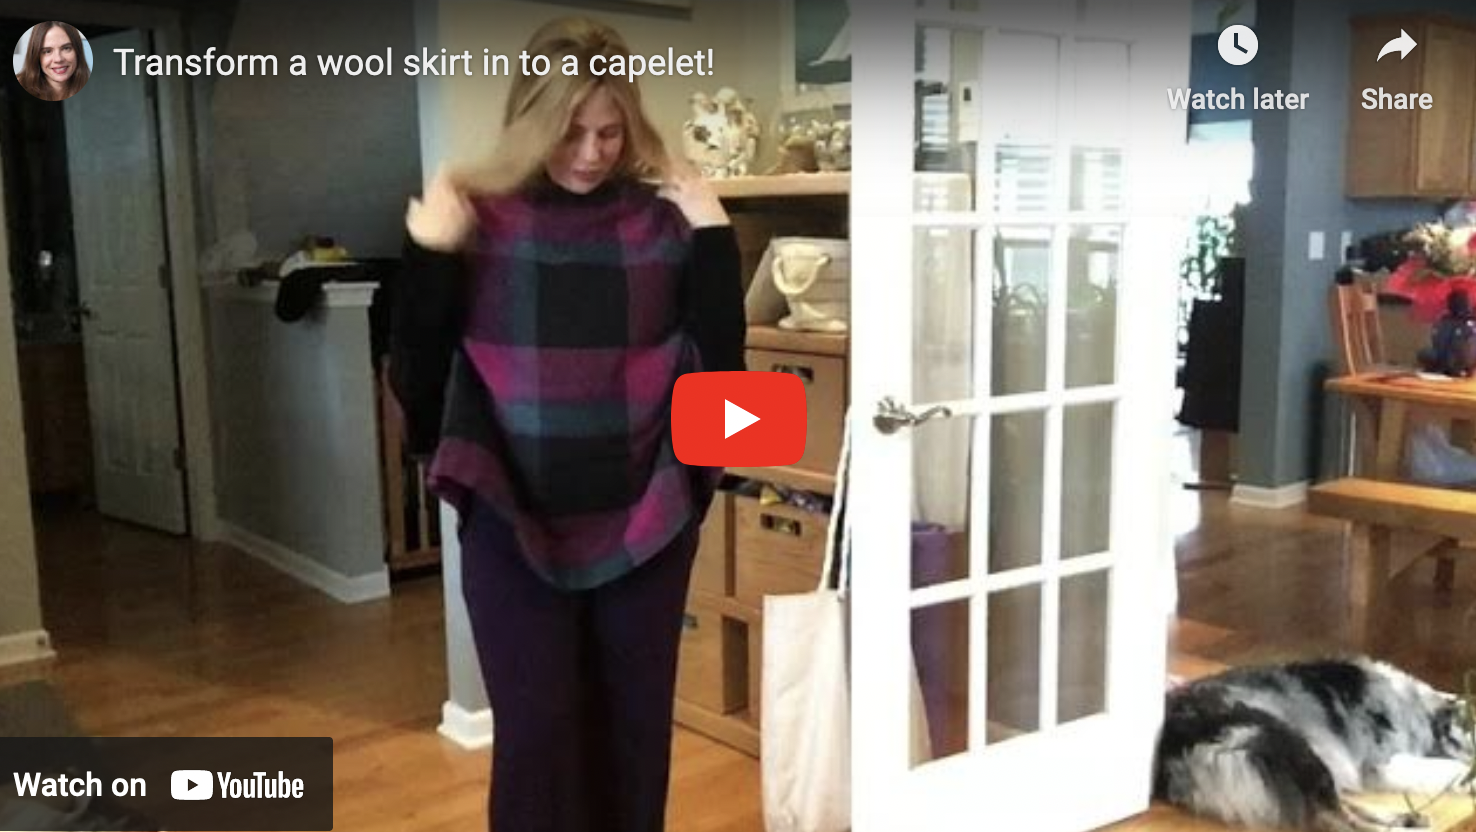 Upcycle a wool skirt into a capelet